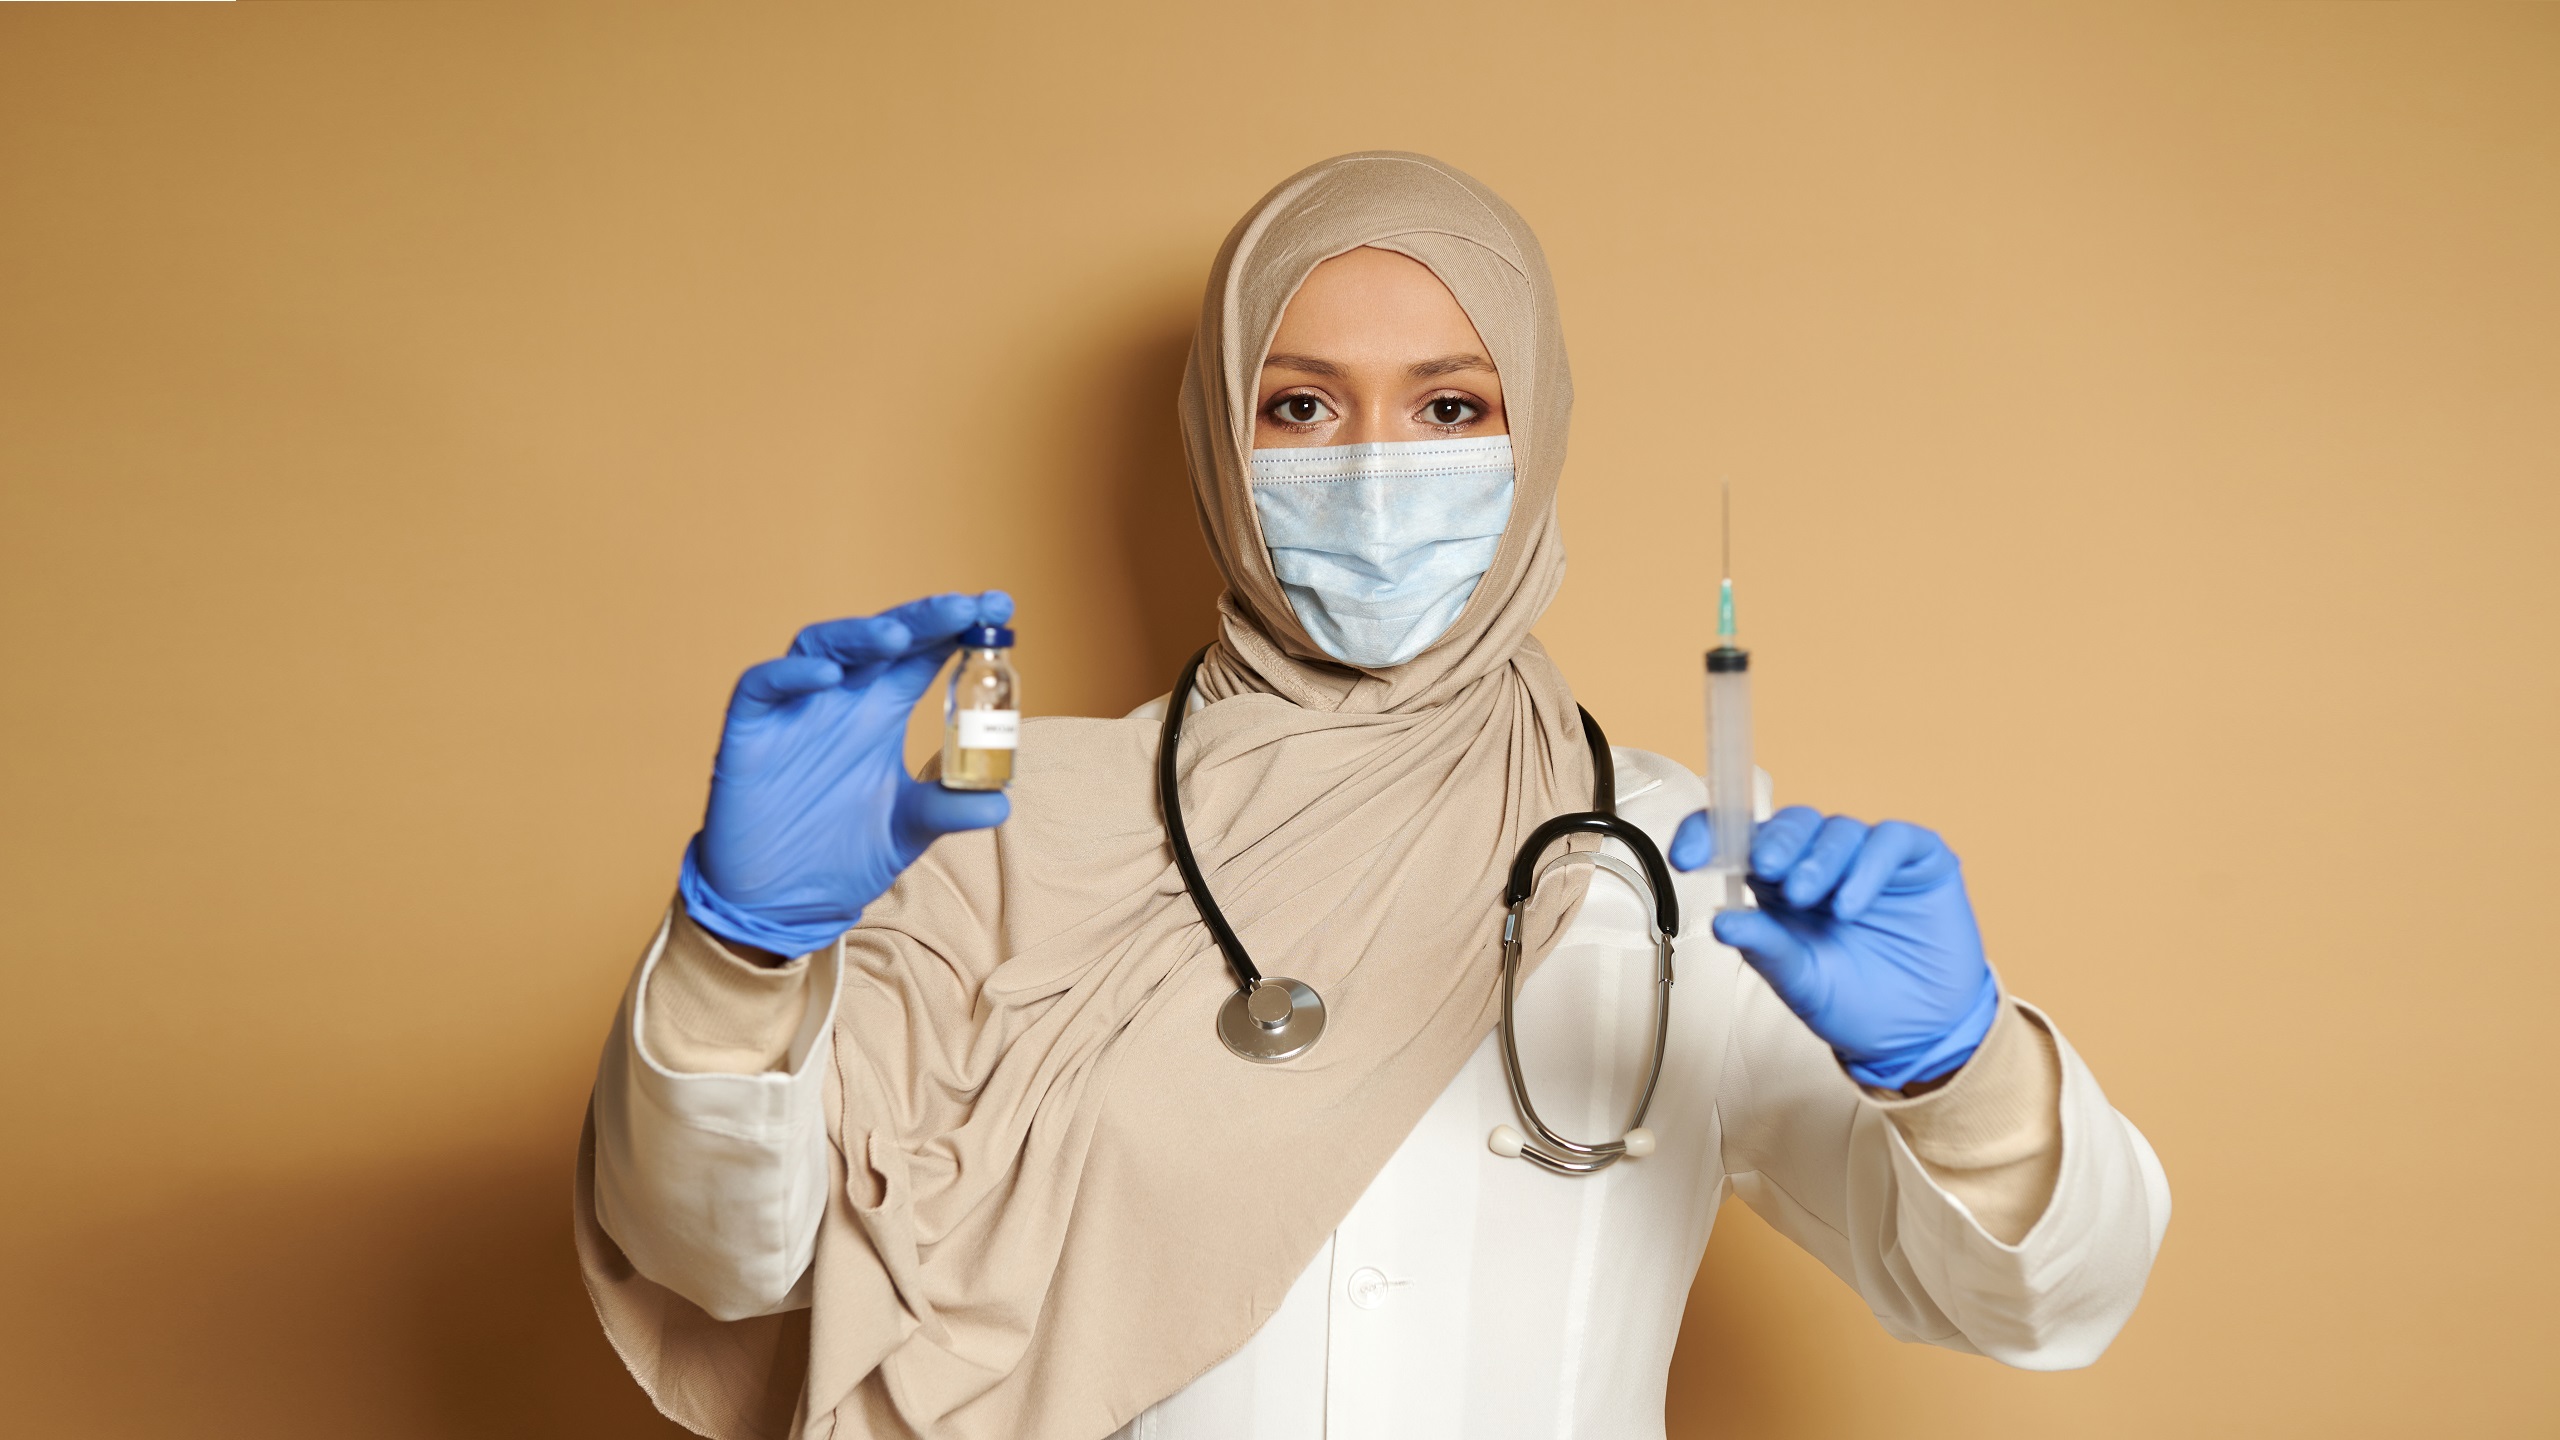 Saudi Arabia Says All Workers Must Be Vaccinated Against COVID-19